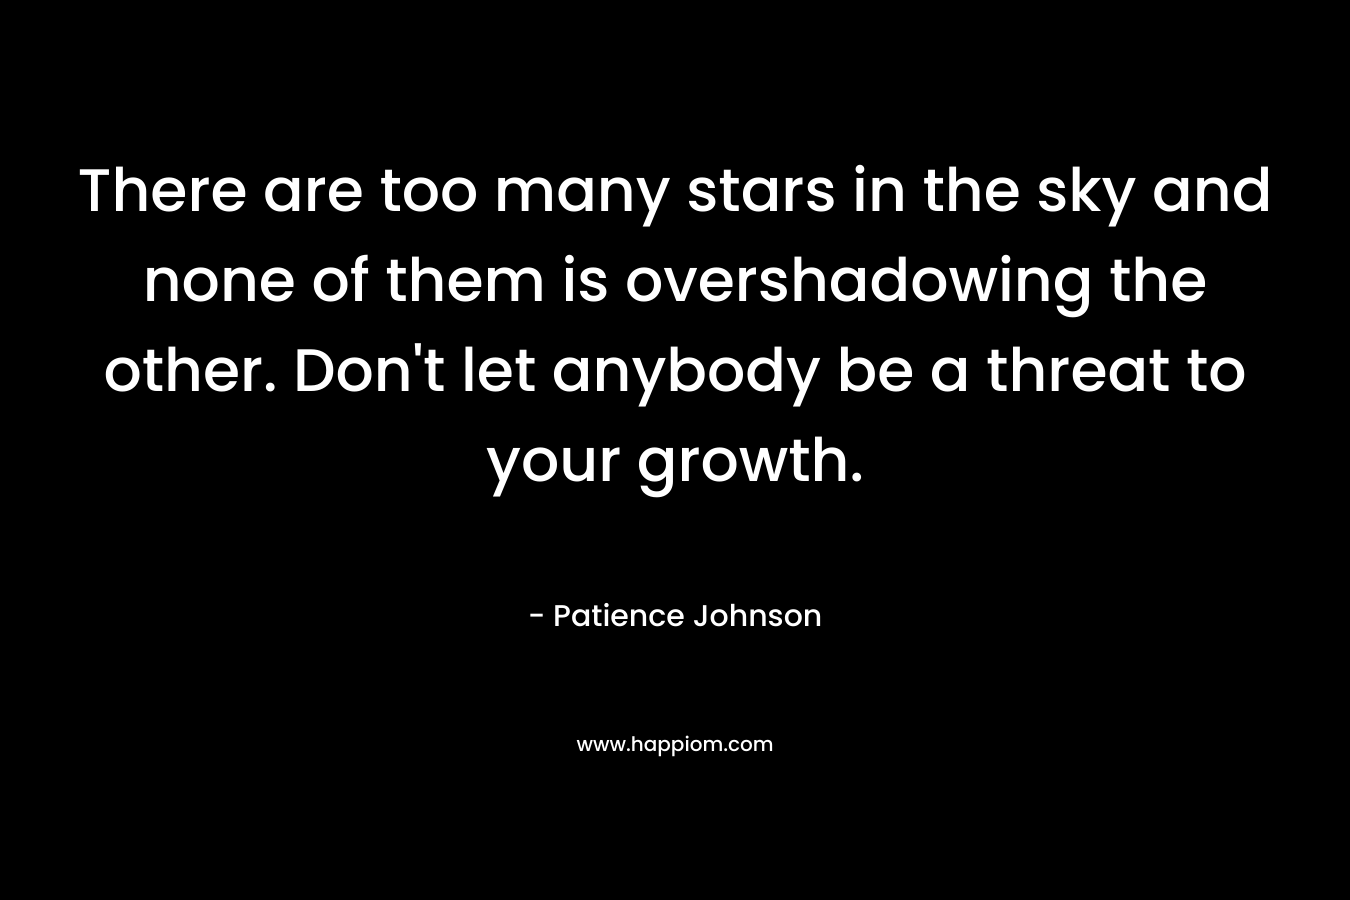 There are too many stars in the sky and none of them is overshadowing the other. Don’t let anybody be a threat to your growth. – Patience Johnson